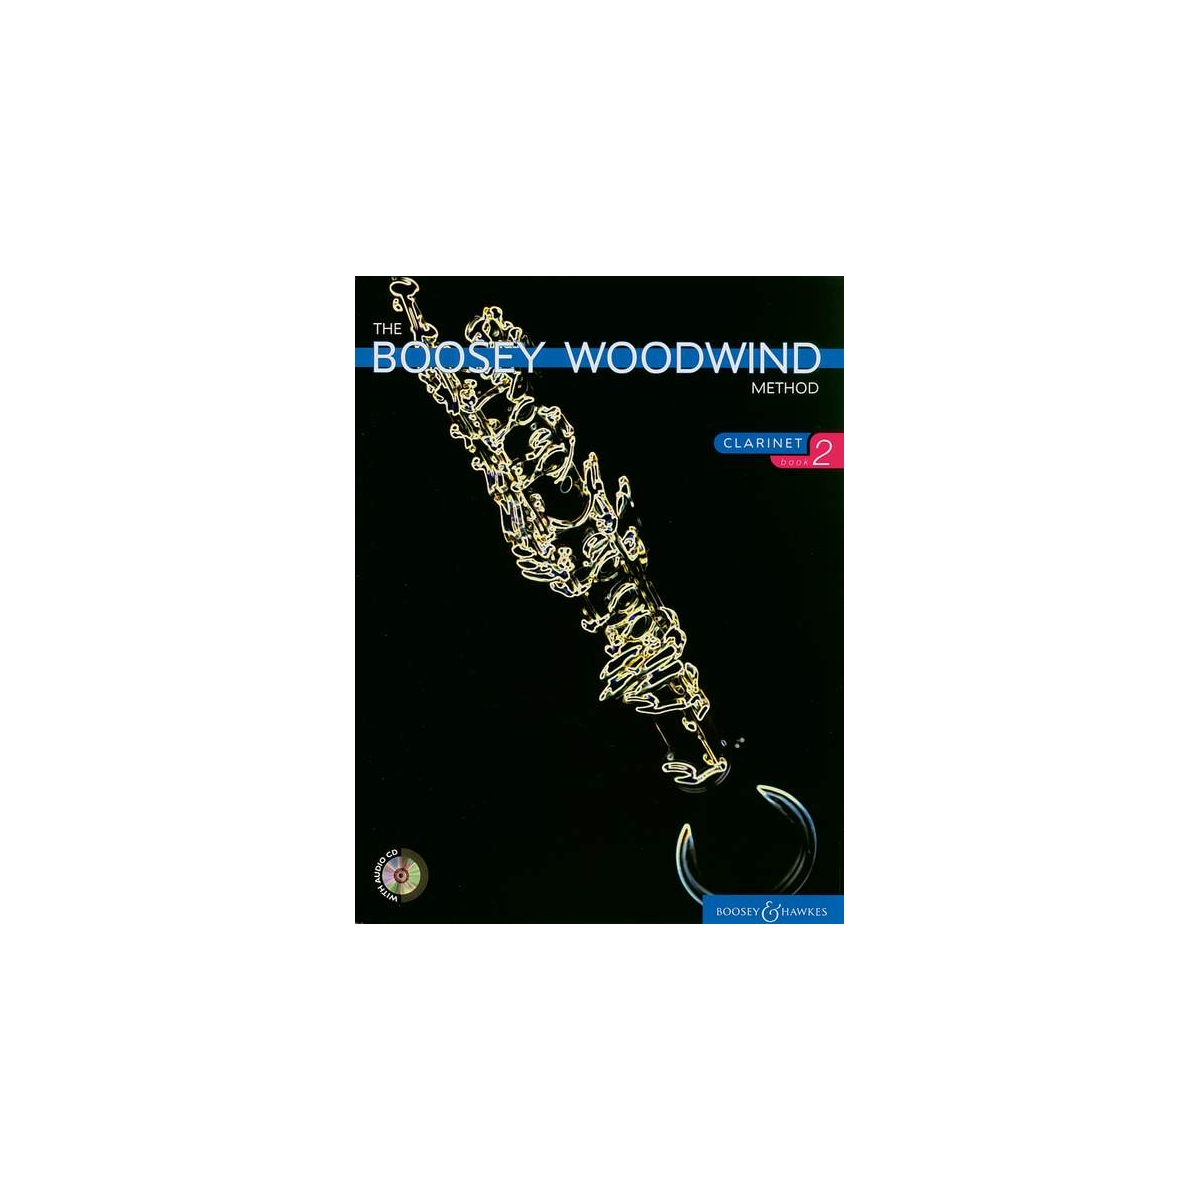 The Boosey Woodwind Method [Clarinet] Book 2